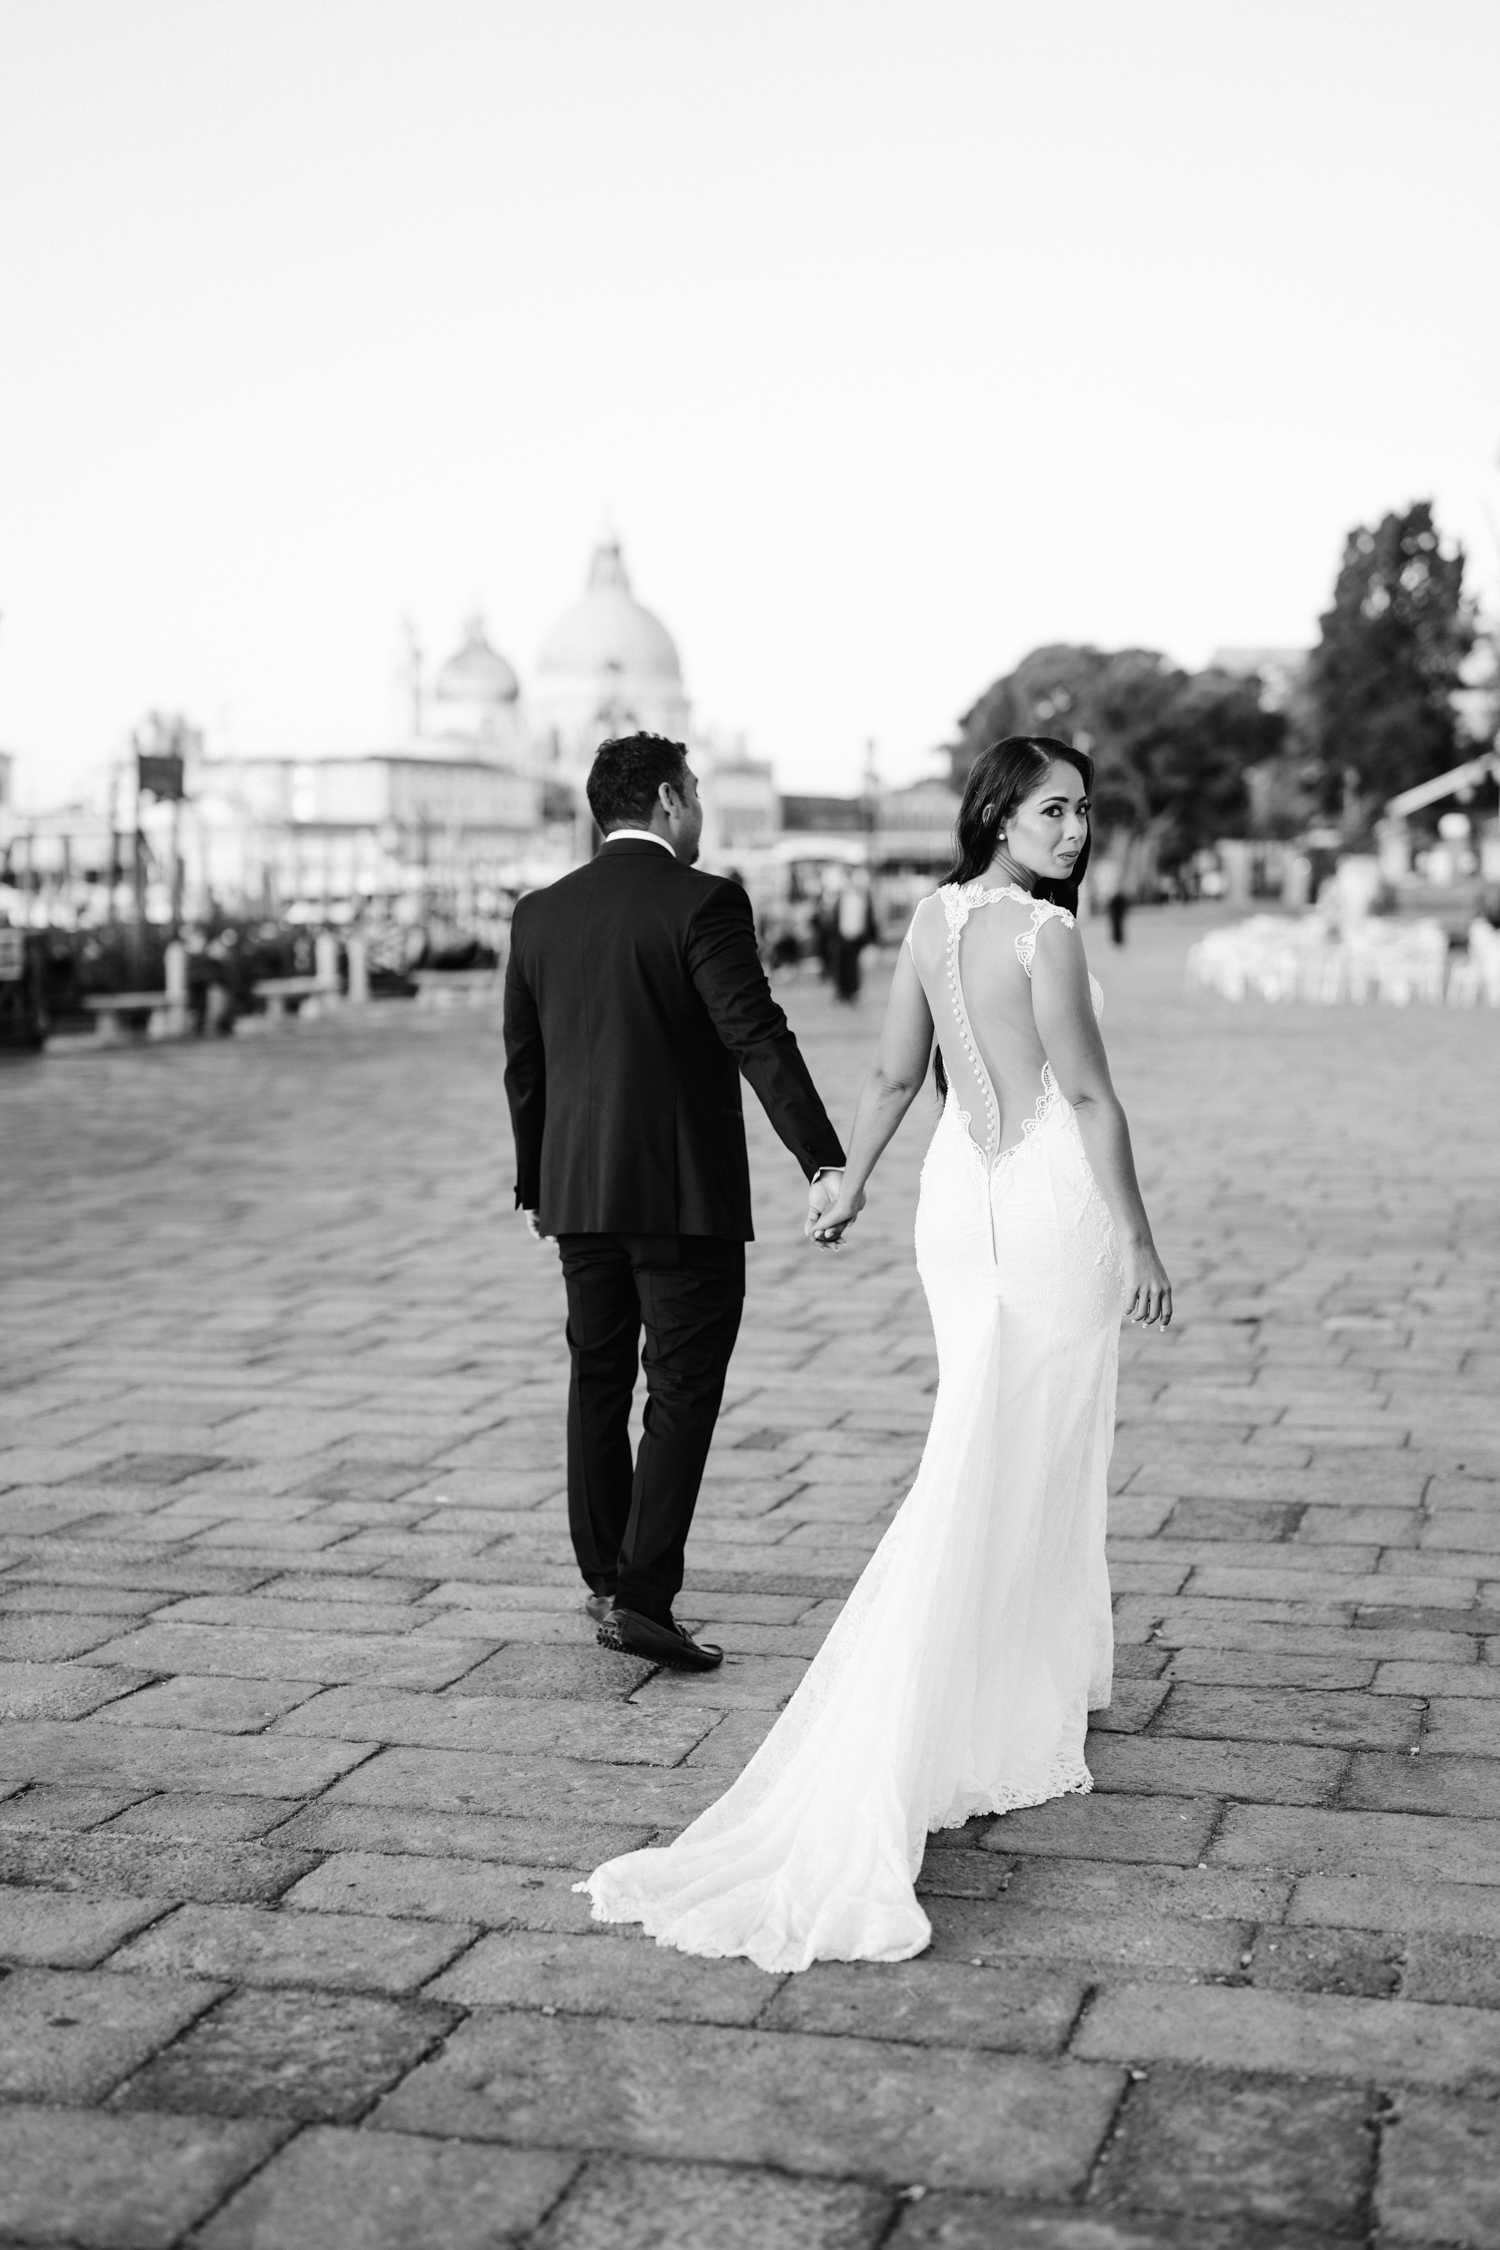 Alina Indi is the best wedding photographer in Venice for your destination wedding or couples romantic photoshoot.